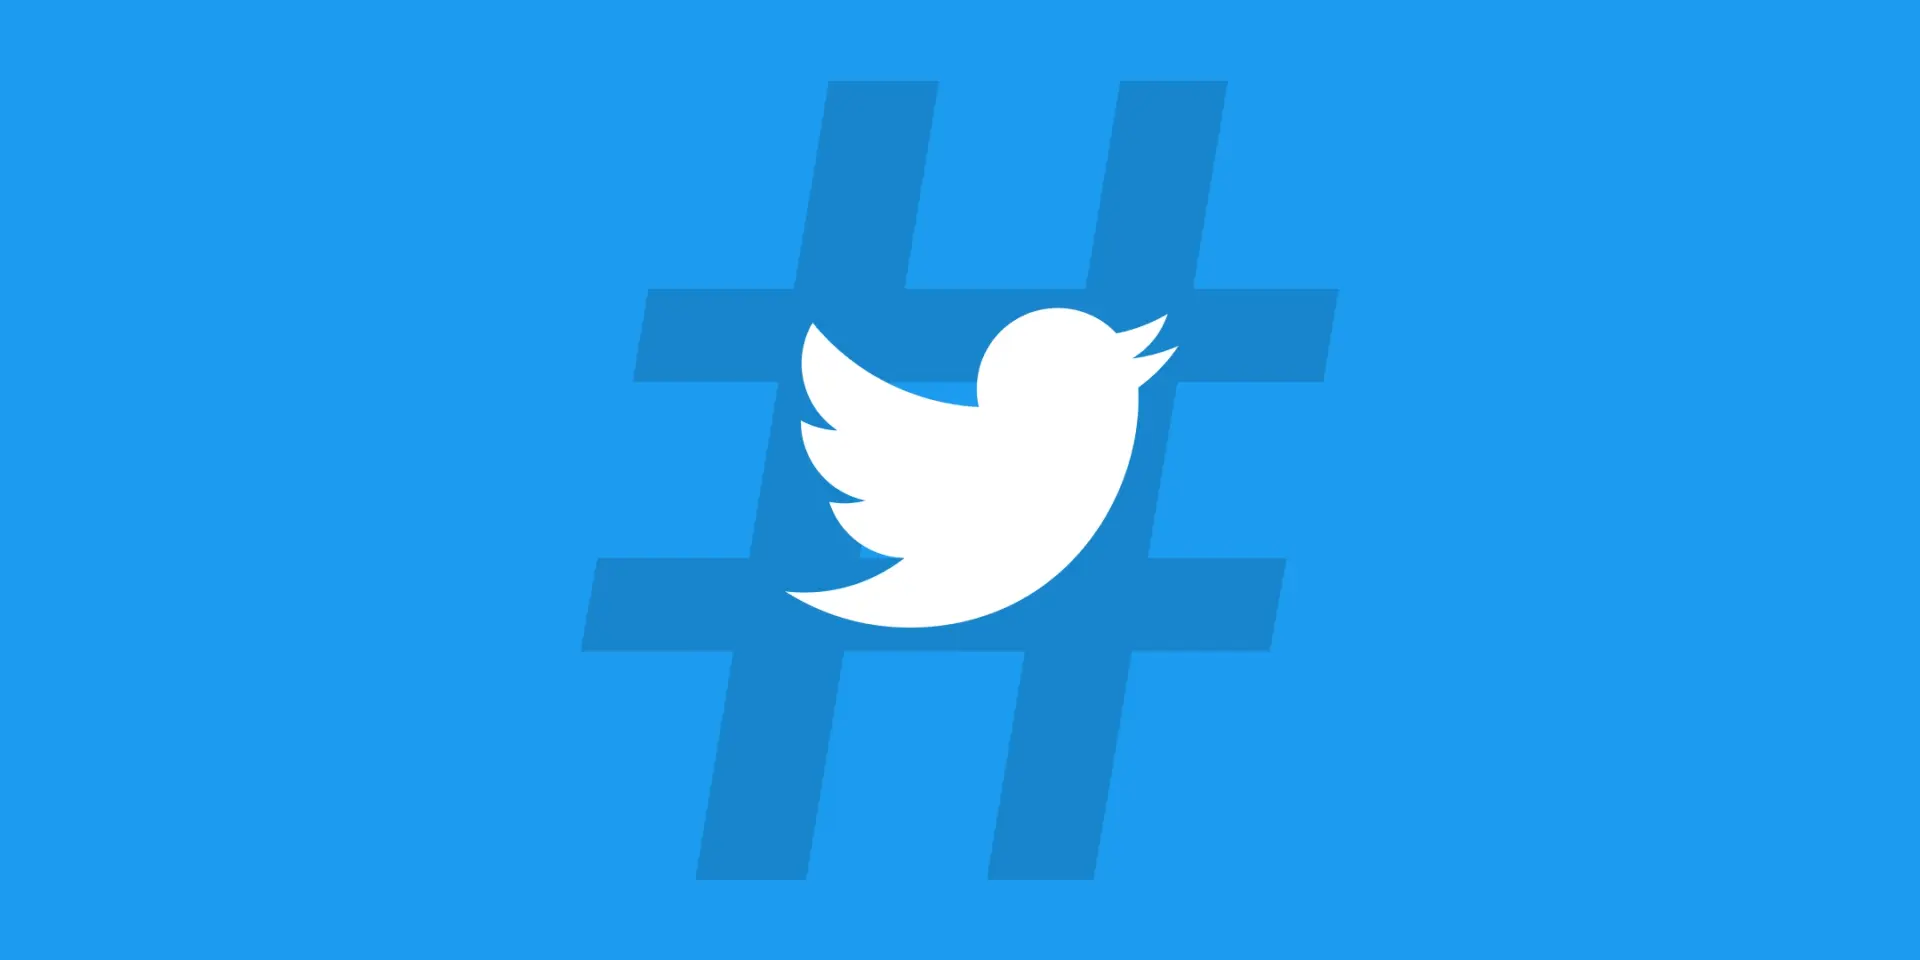 twitter logo with a hashtag